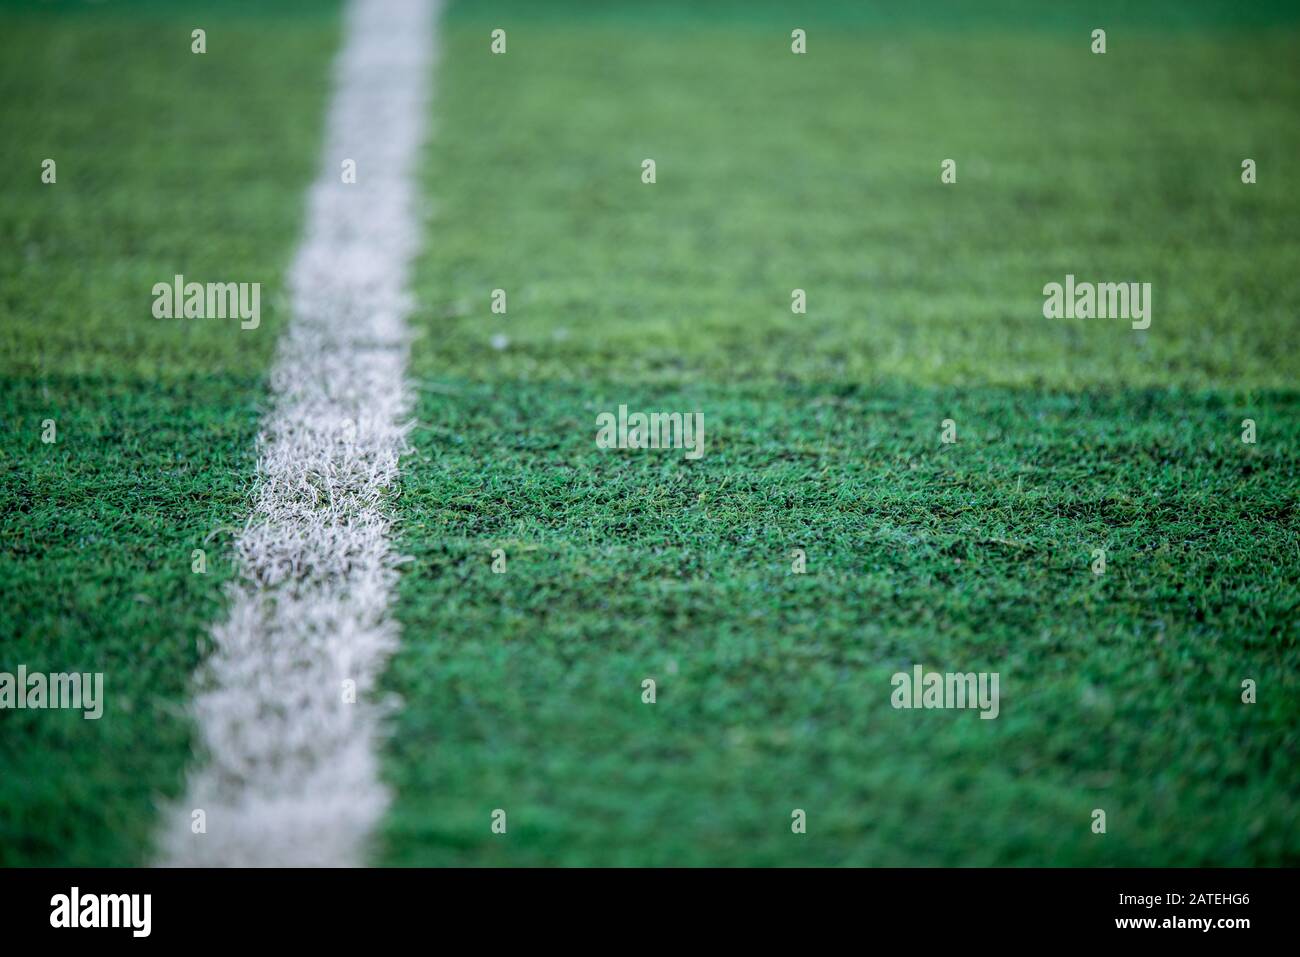 Football field with white line Stock Photo